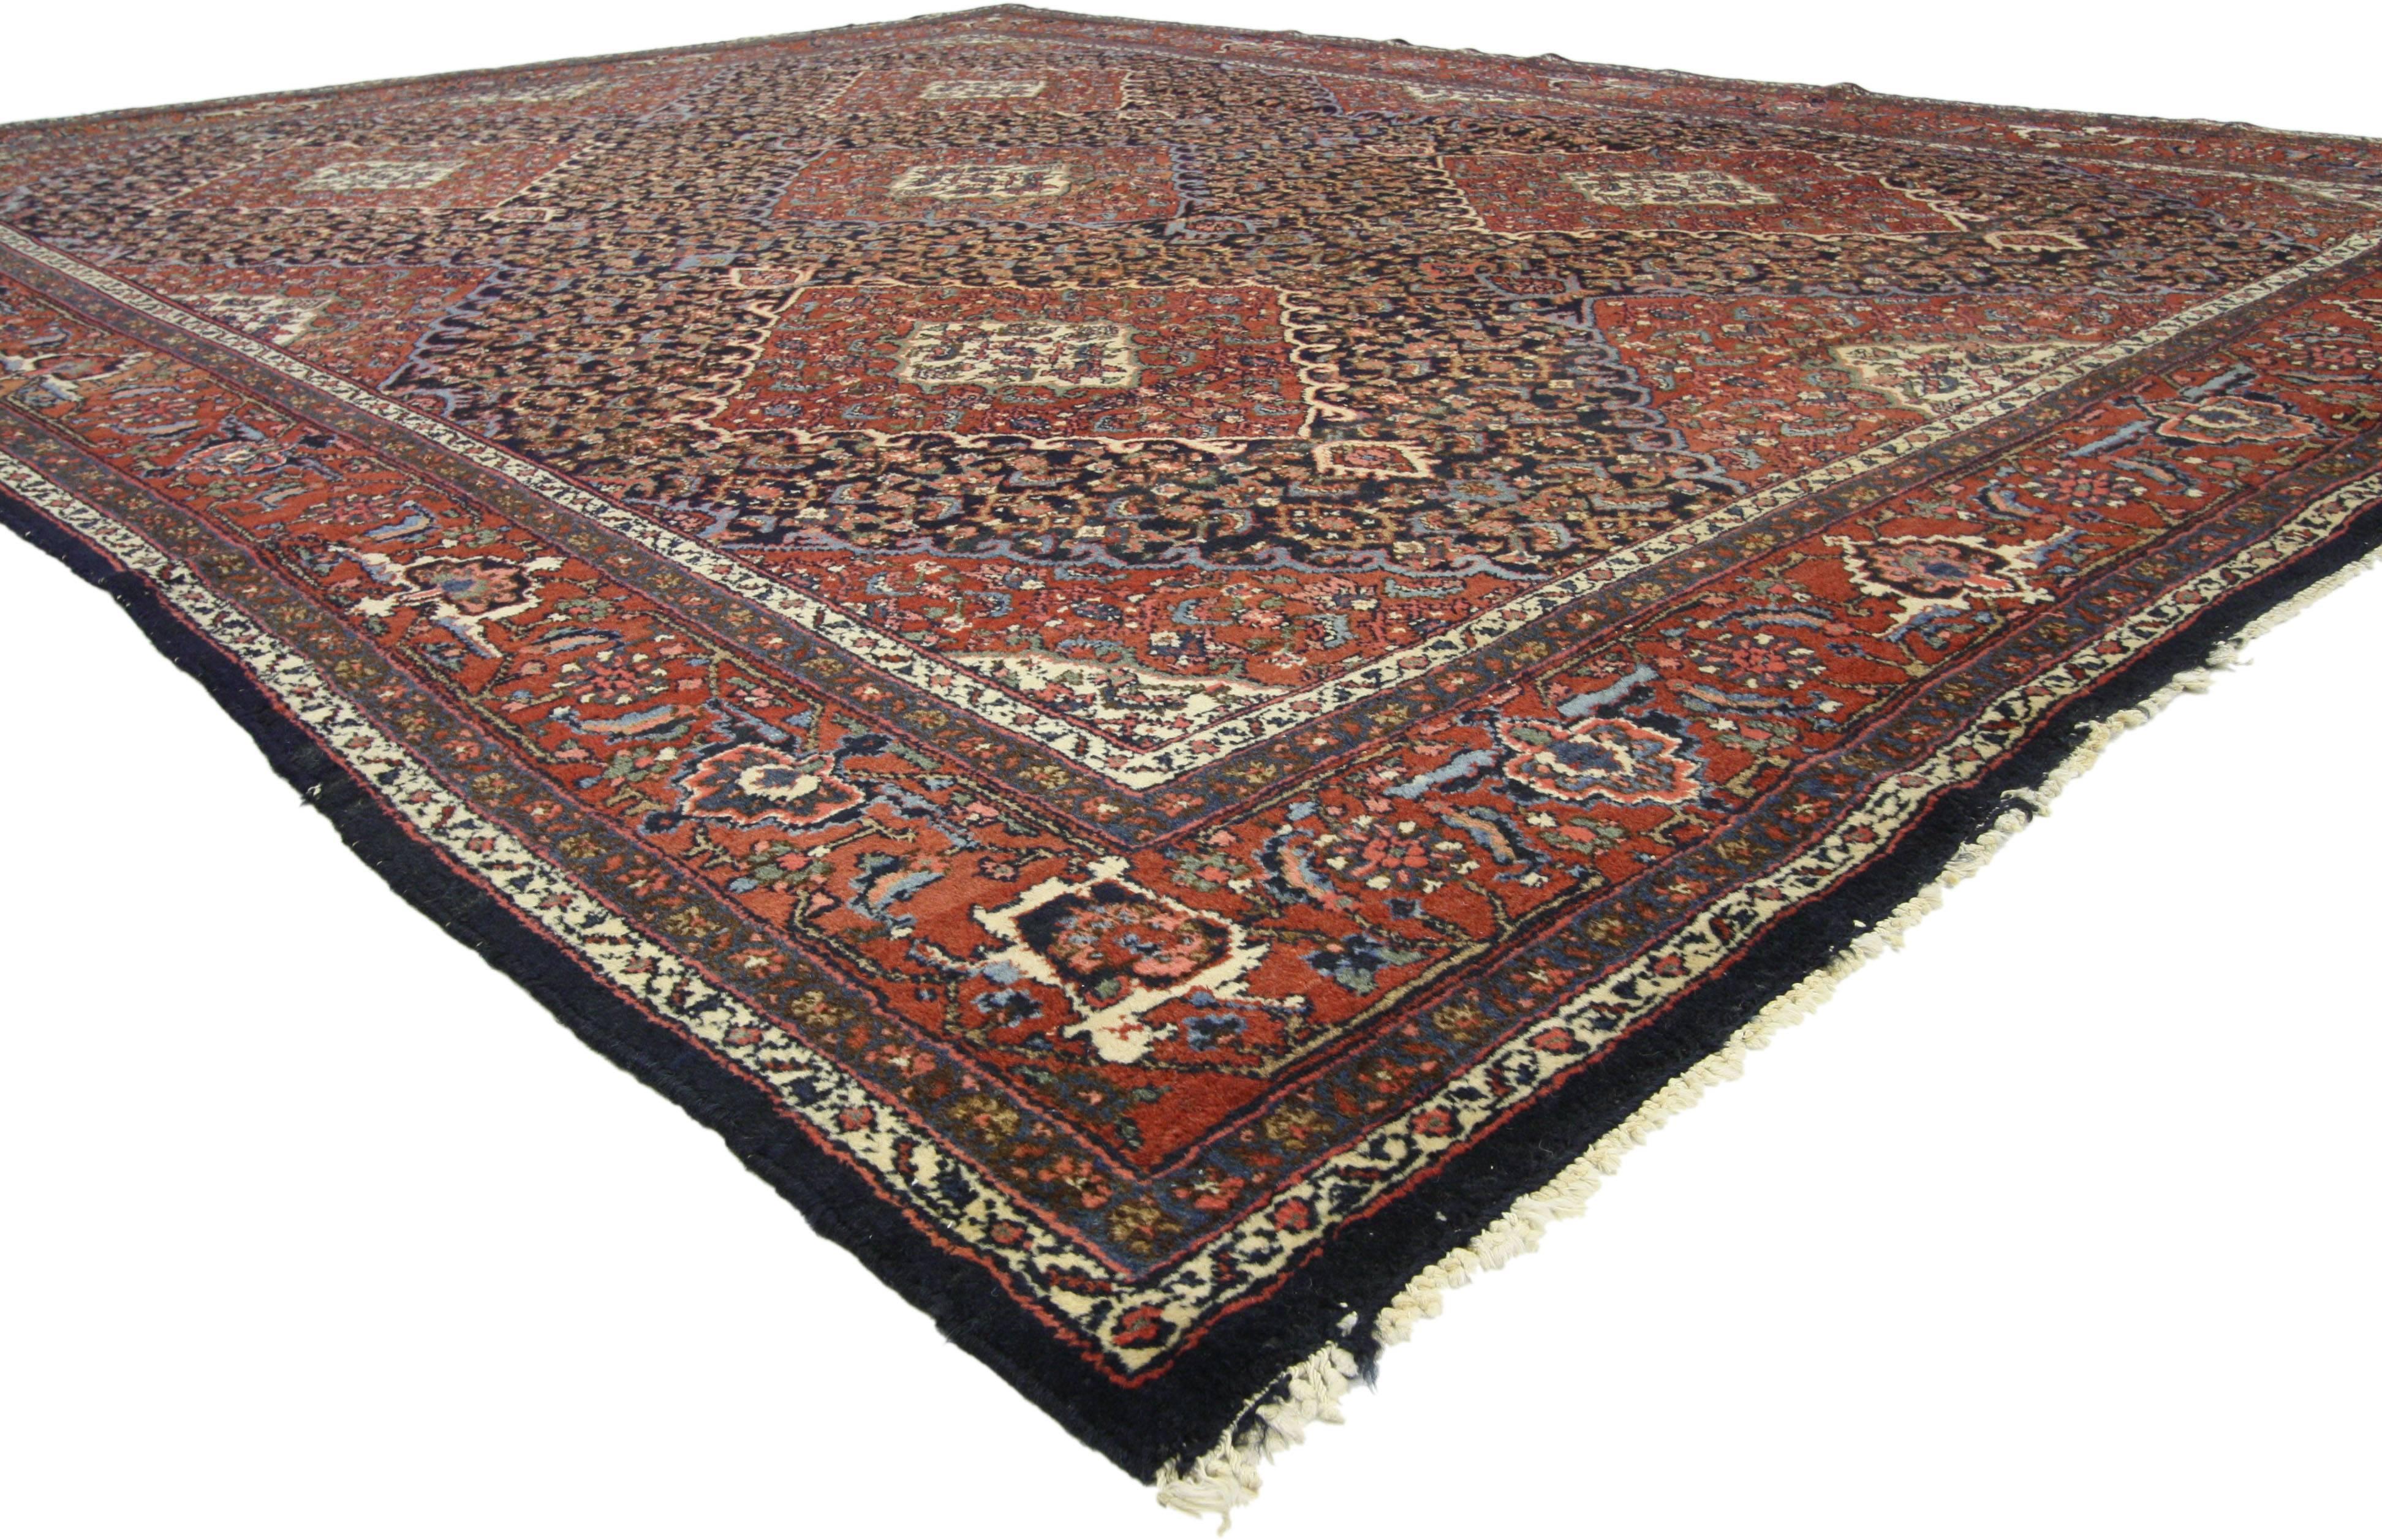 20th Century Antique Persian Bibikabad Rug with Modern Traditional Style